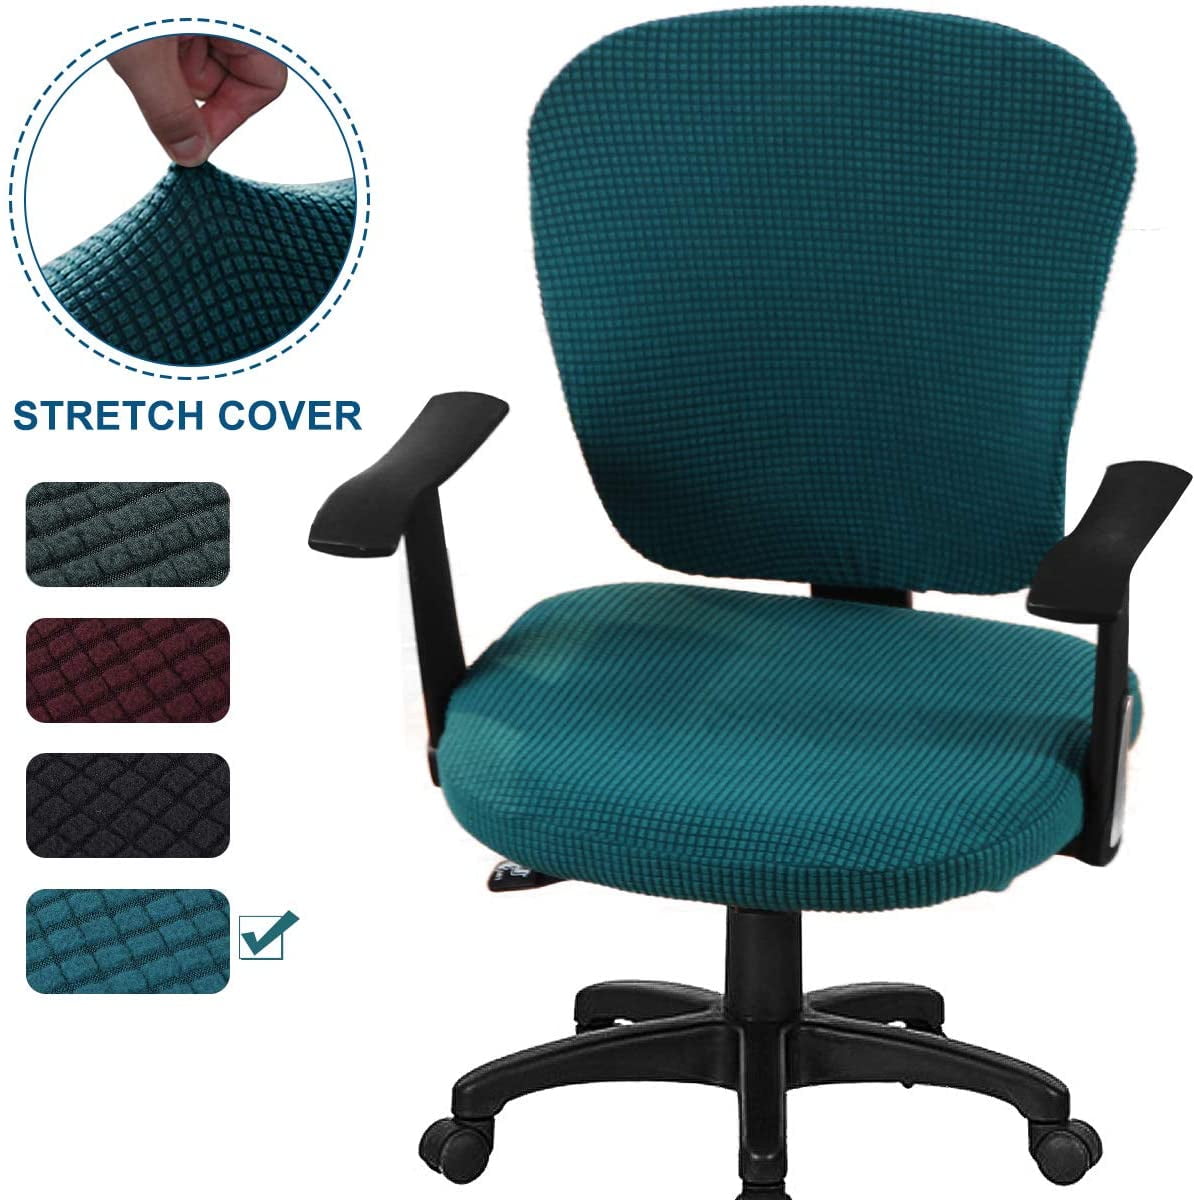 Stretchy Office Desk Chair Covers Office Computer Chair Seat Slipcover 